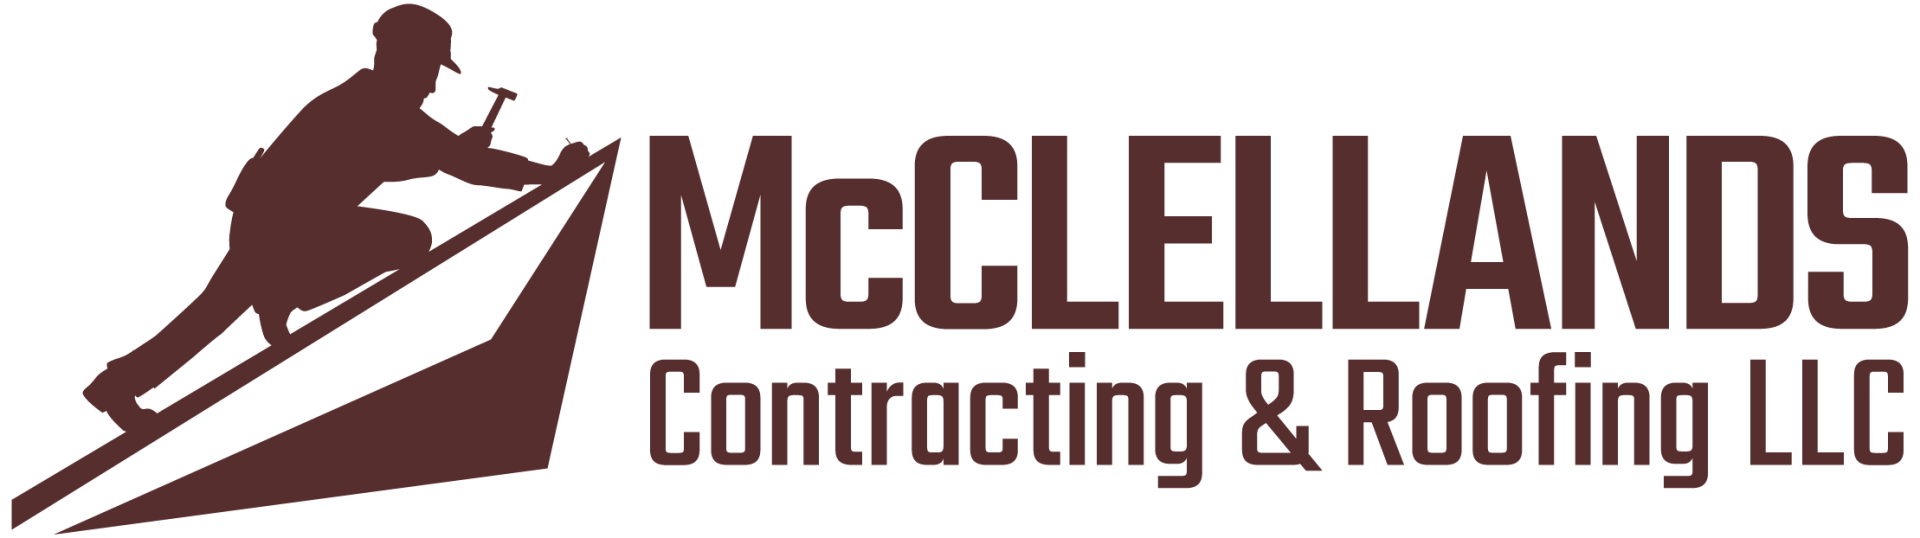 McClellands Contracting And Roofing LLC Logo